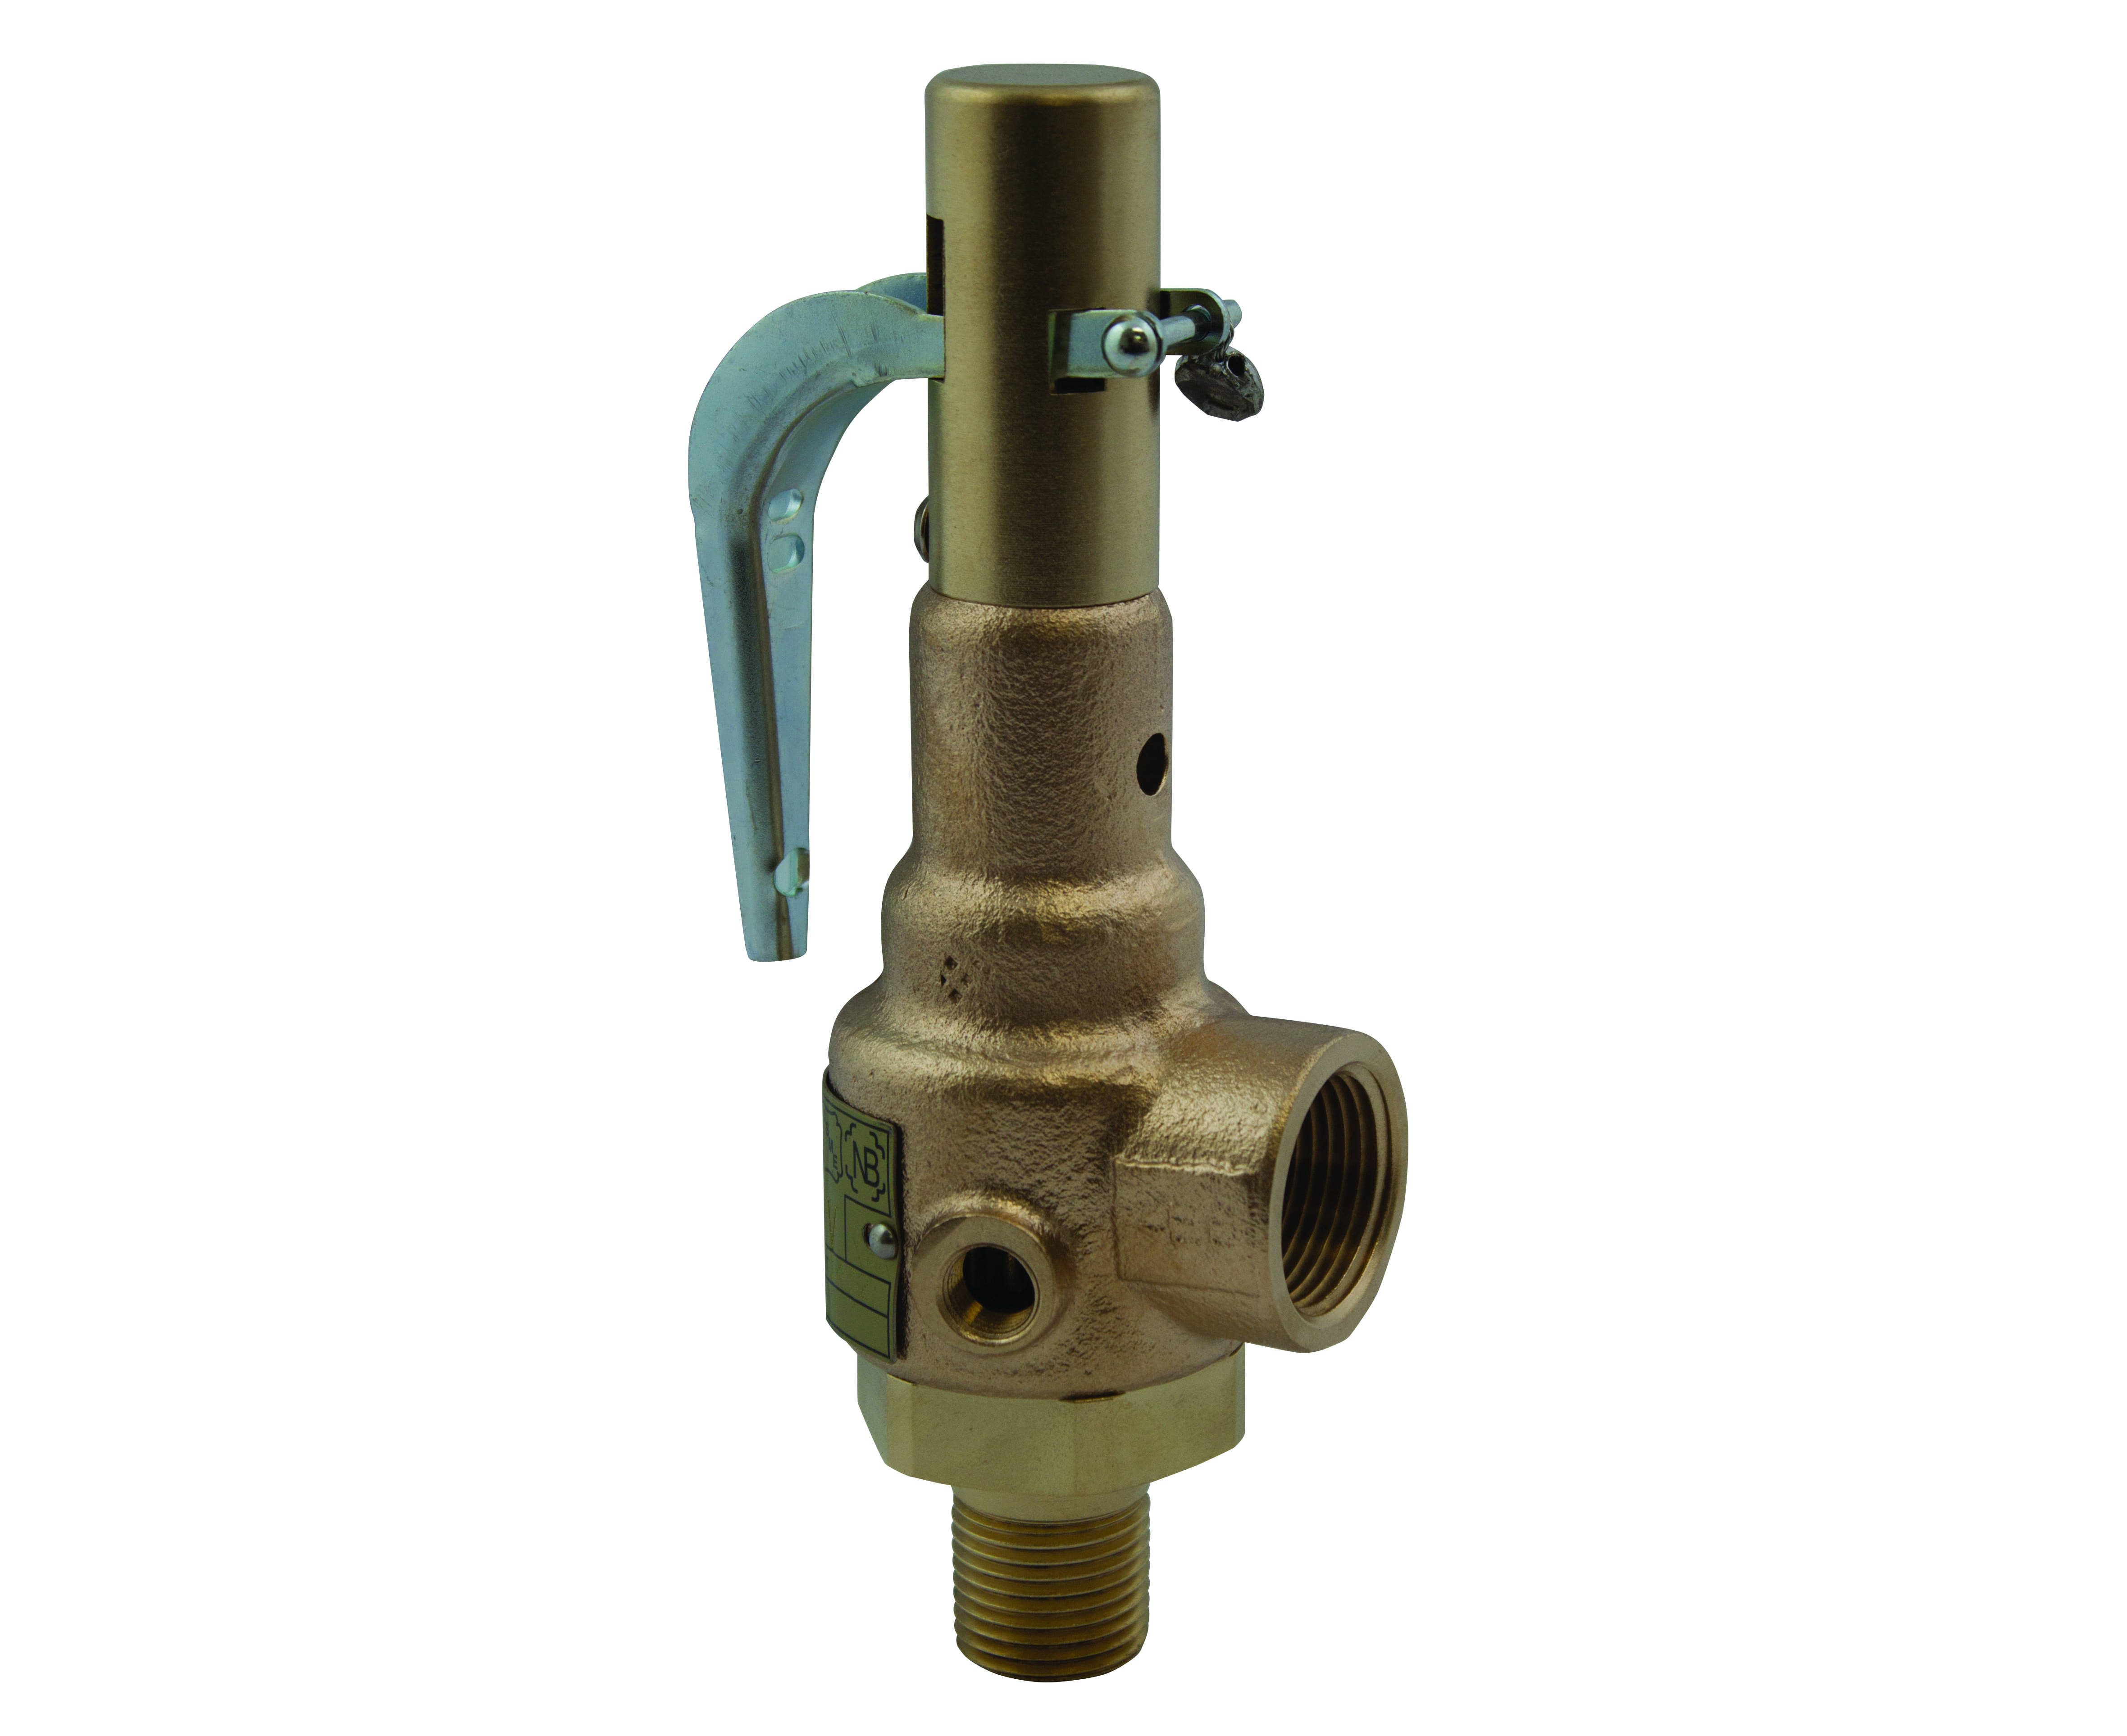 Preview image for Apollo ASME Sec VIII Air Bronze Safety Relief Valves with Brass Trim, Teflon Seat, Oxygen Cleaned, 1-1/4" x 1-1/2" (MNPT x FNPT)